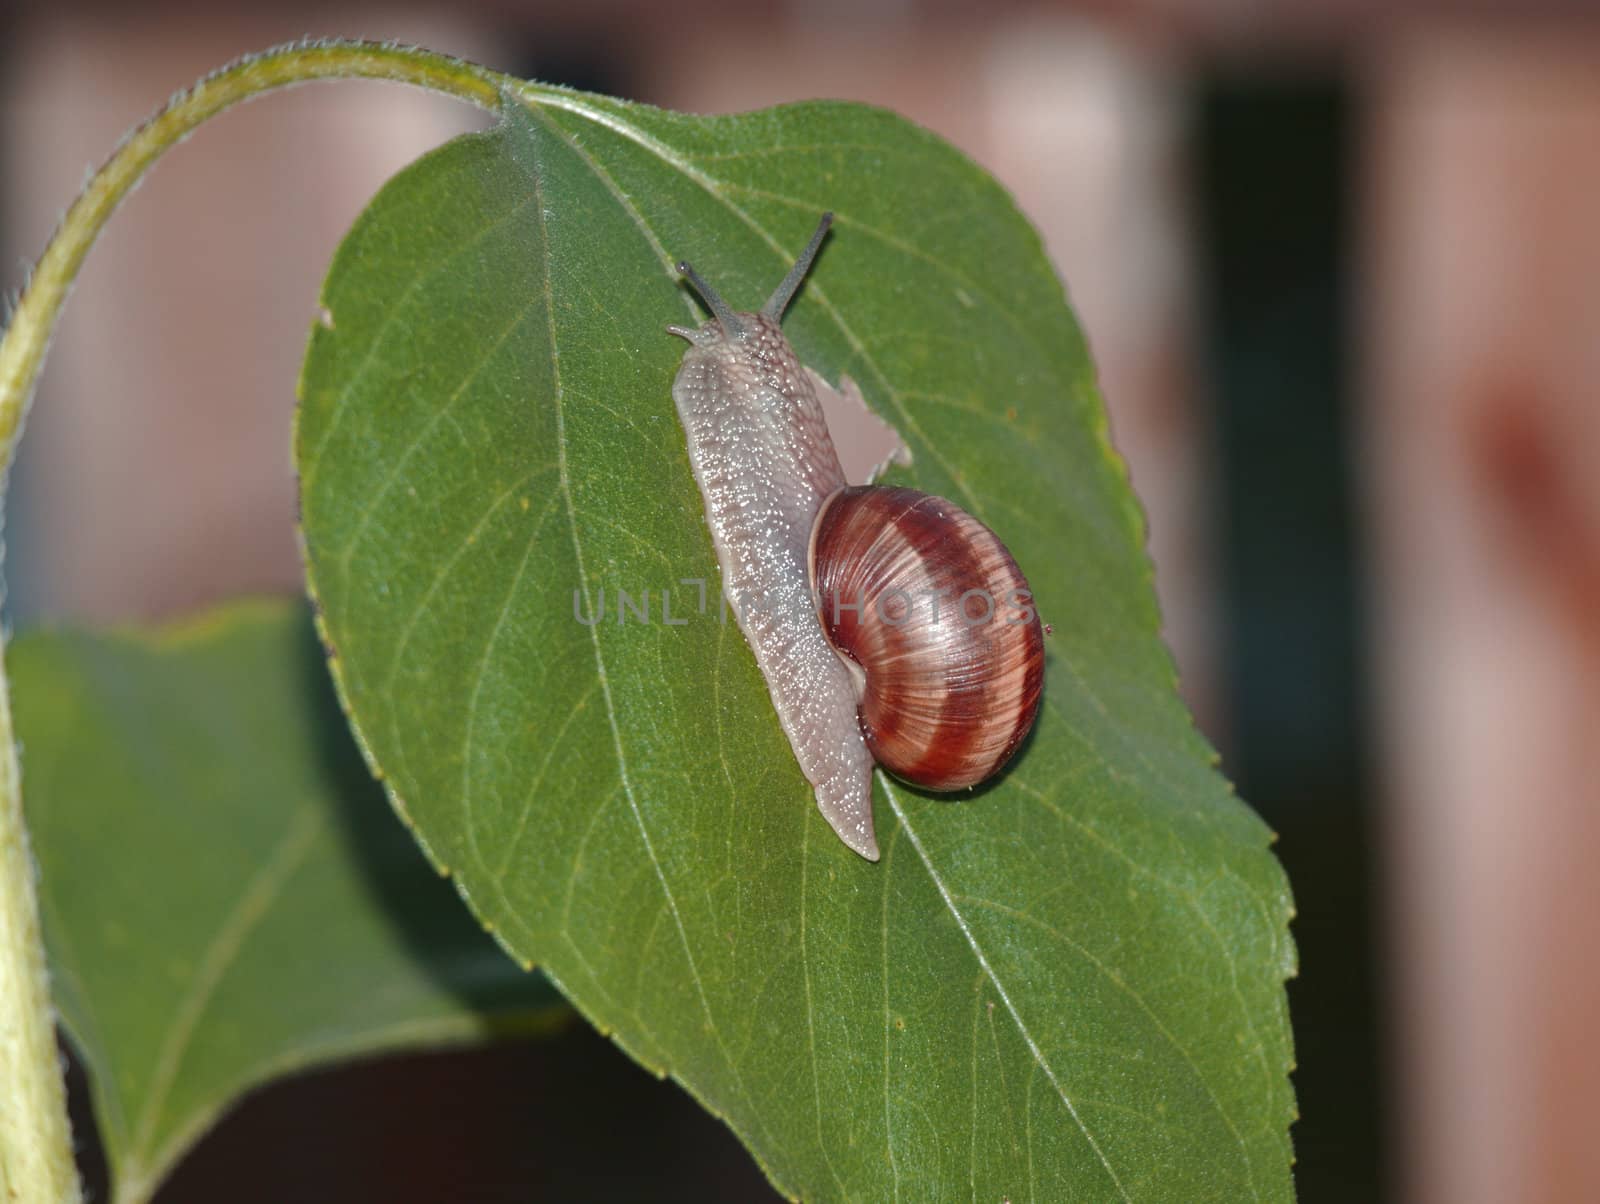 Small snail on the leaf by renales